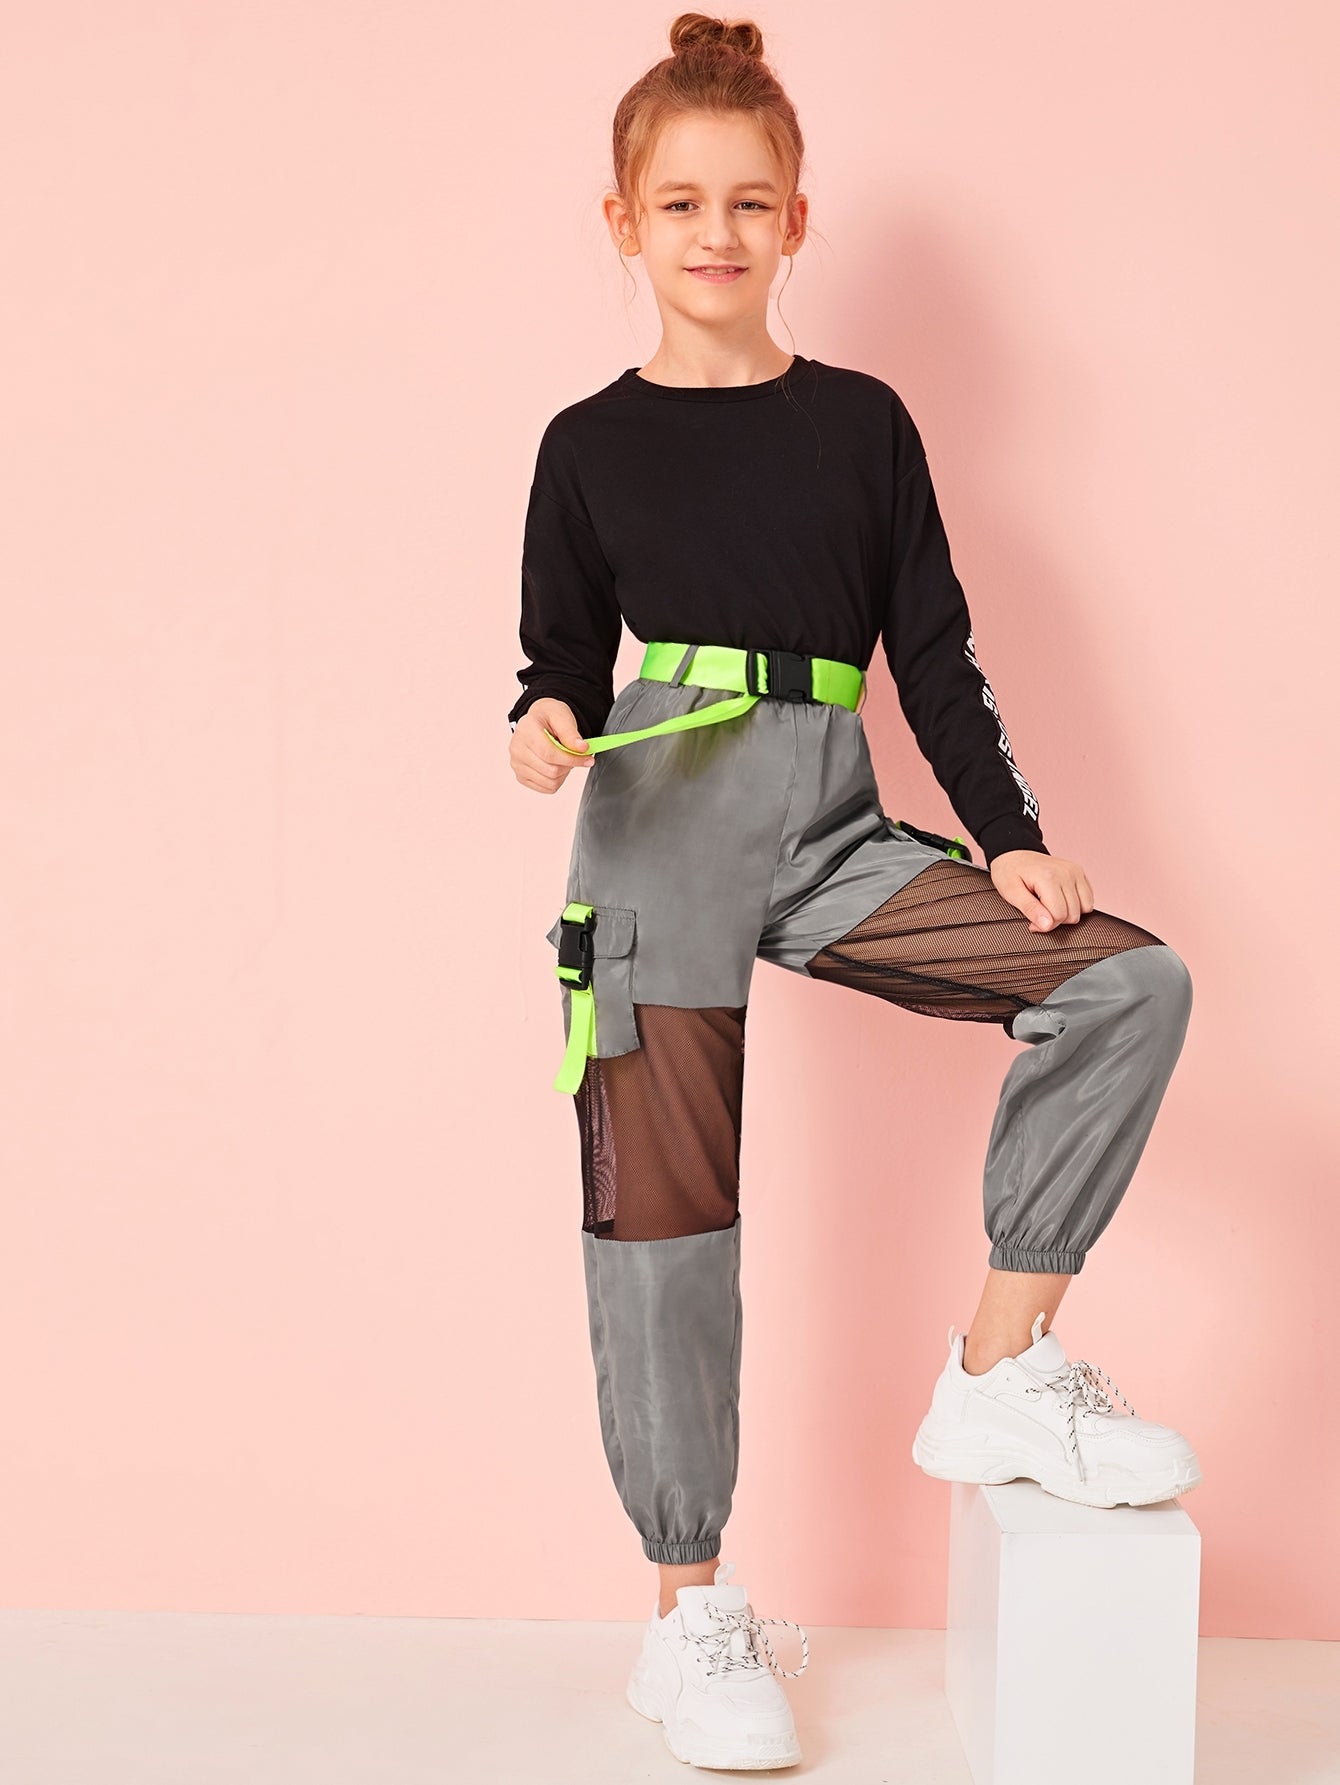 456 Girls Wind Pants Stock Photos HighRes Pictures and Images  Getty  Images